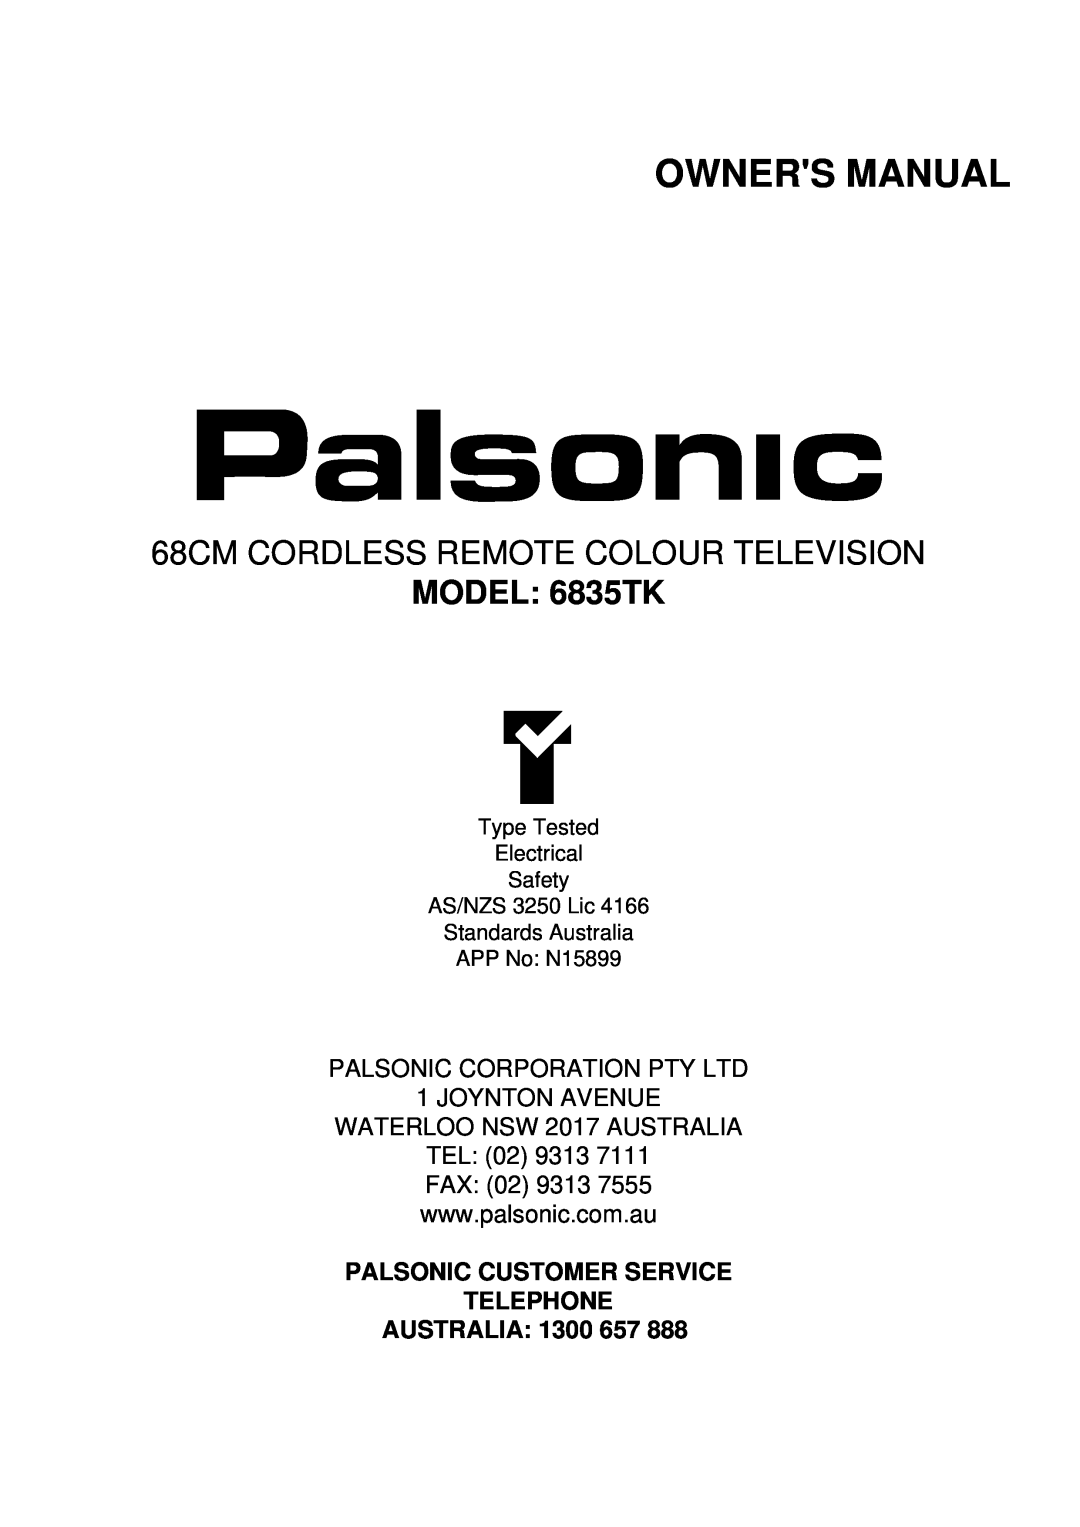 Palsonic owner manual Owners Manual, 68CM CORDLESS REMOTE COLOUR TELEVISION, MODEL 6835TK, APP No N15899 